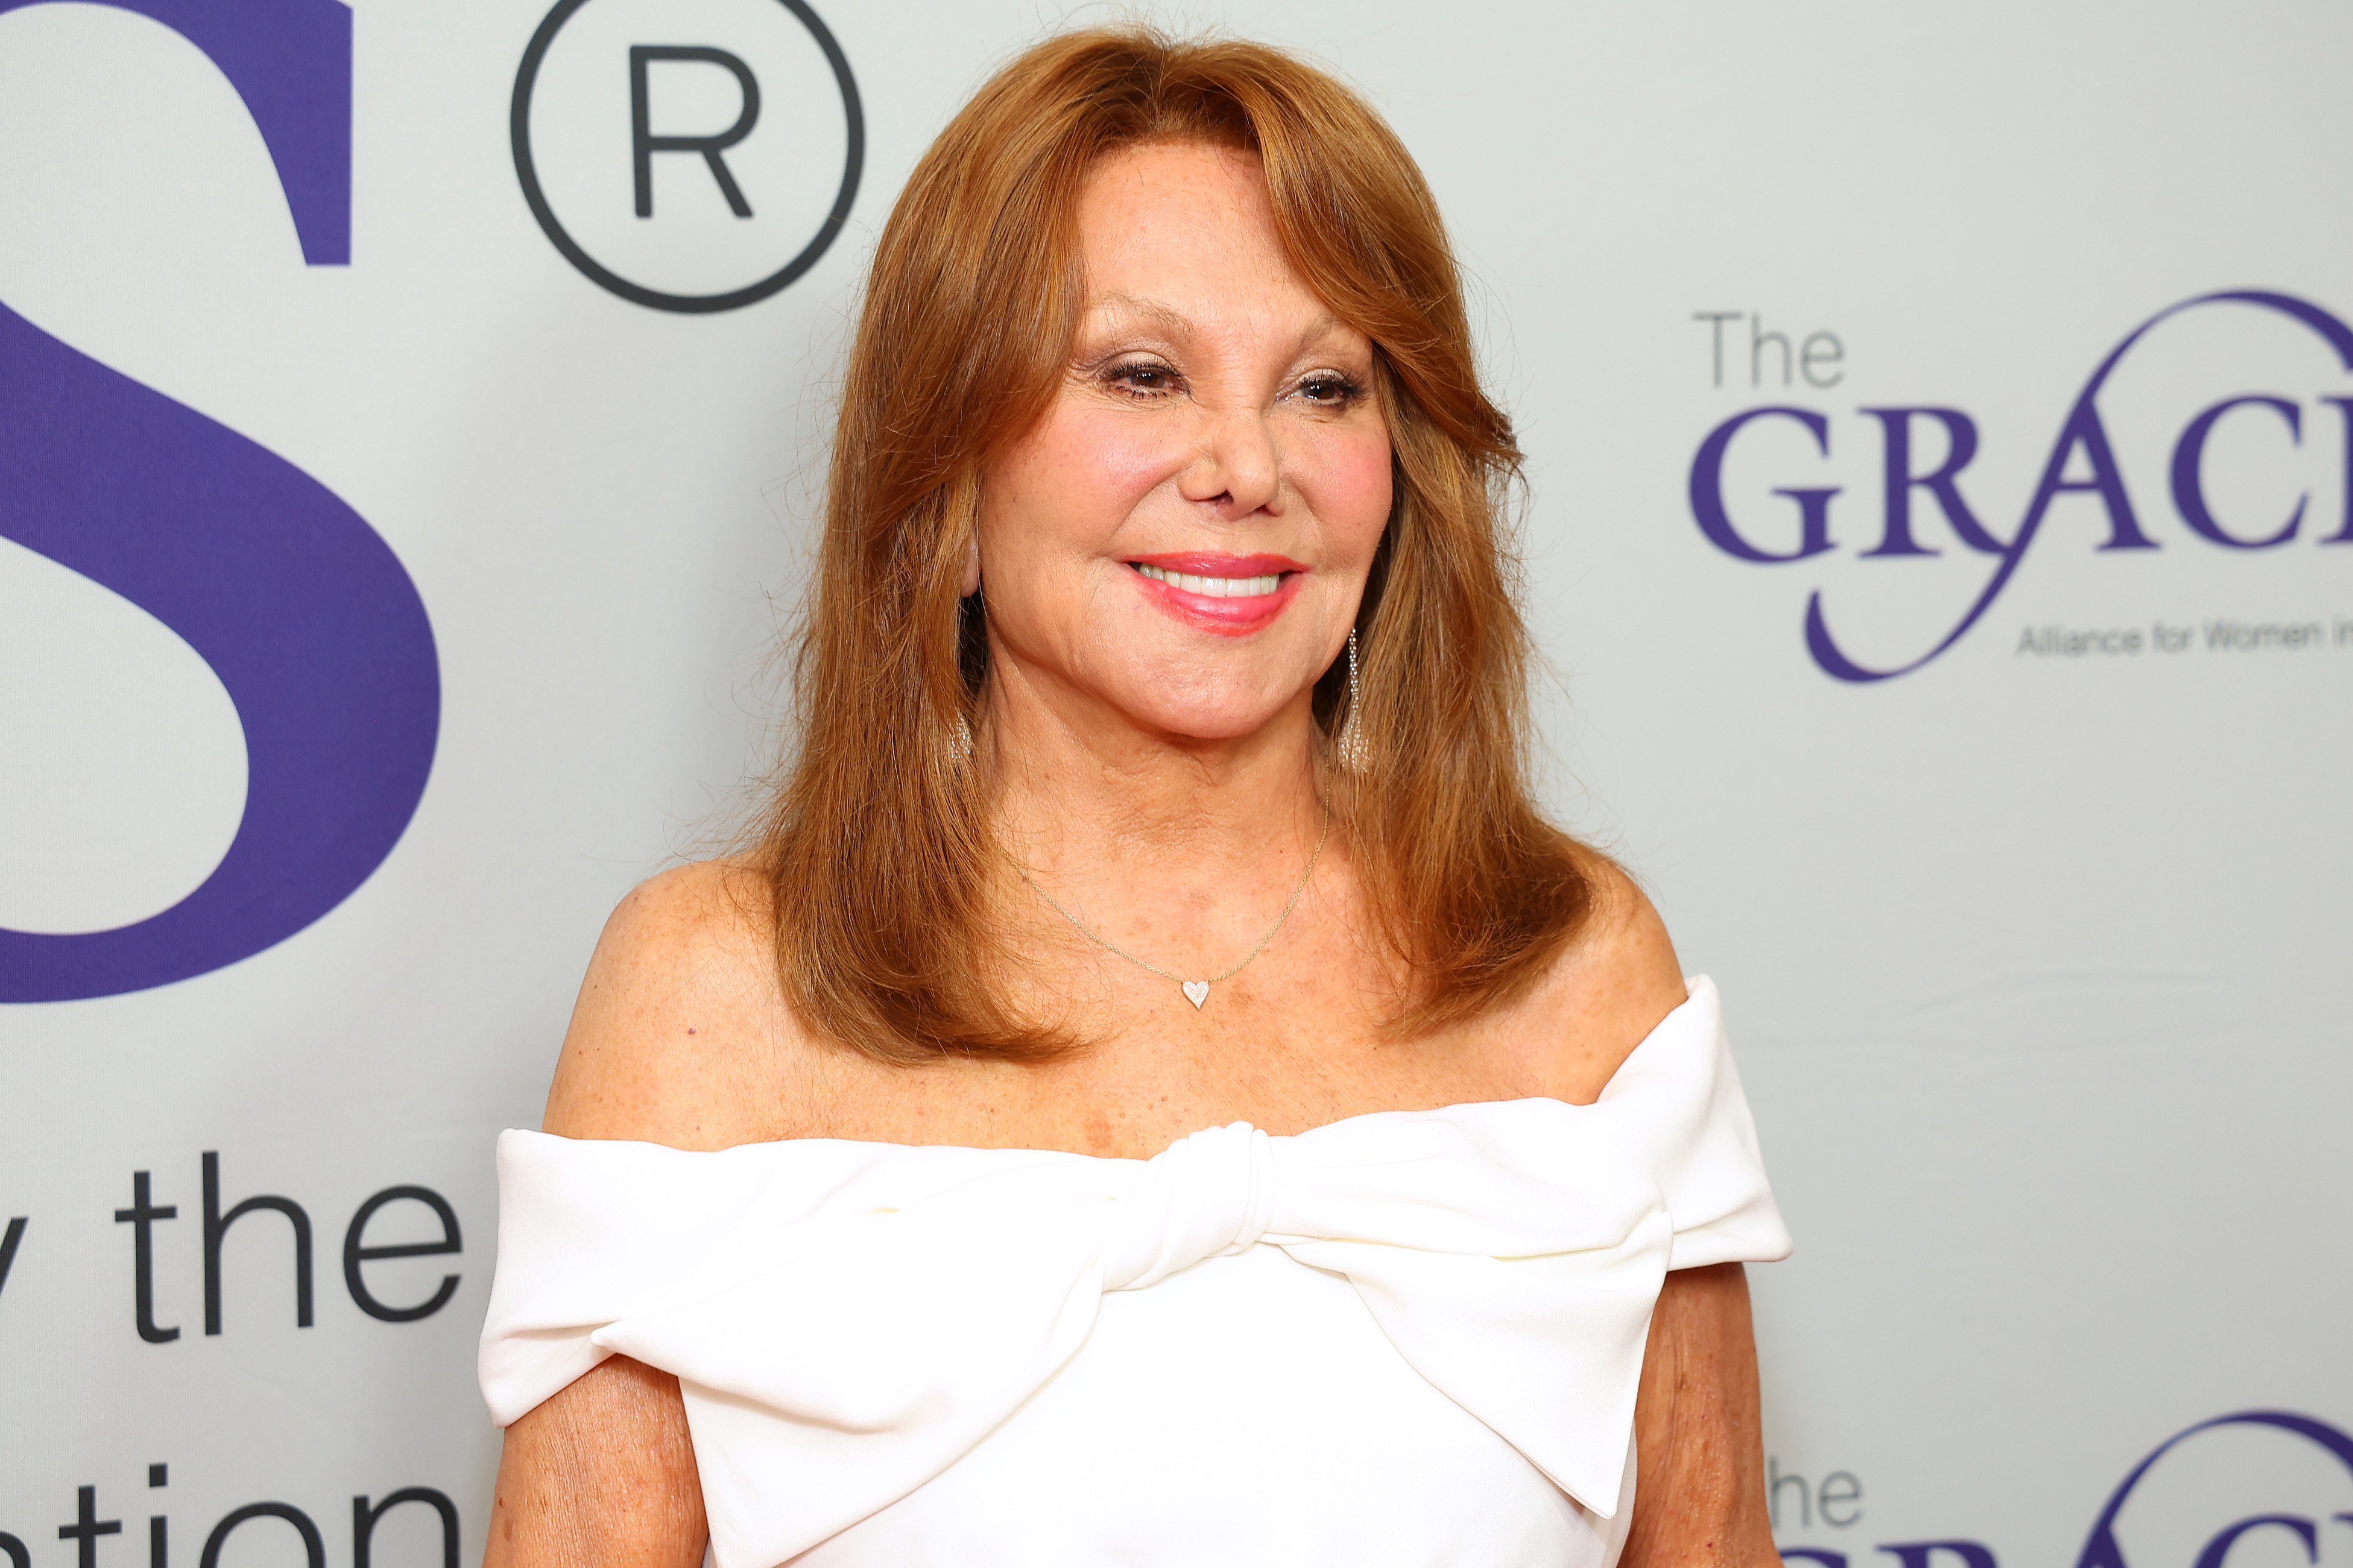 Marlo Thomas attends the Alliance for Women in Media Foundation's 48th annual Gracie Awards Gala in Beverly Hills, California, on May 23, 2023. | Source: Getty Images